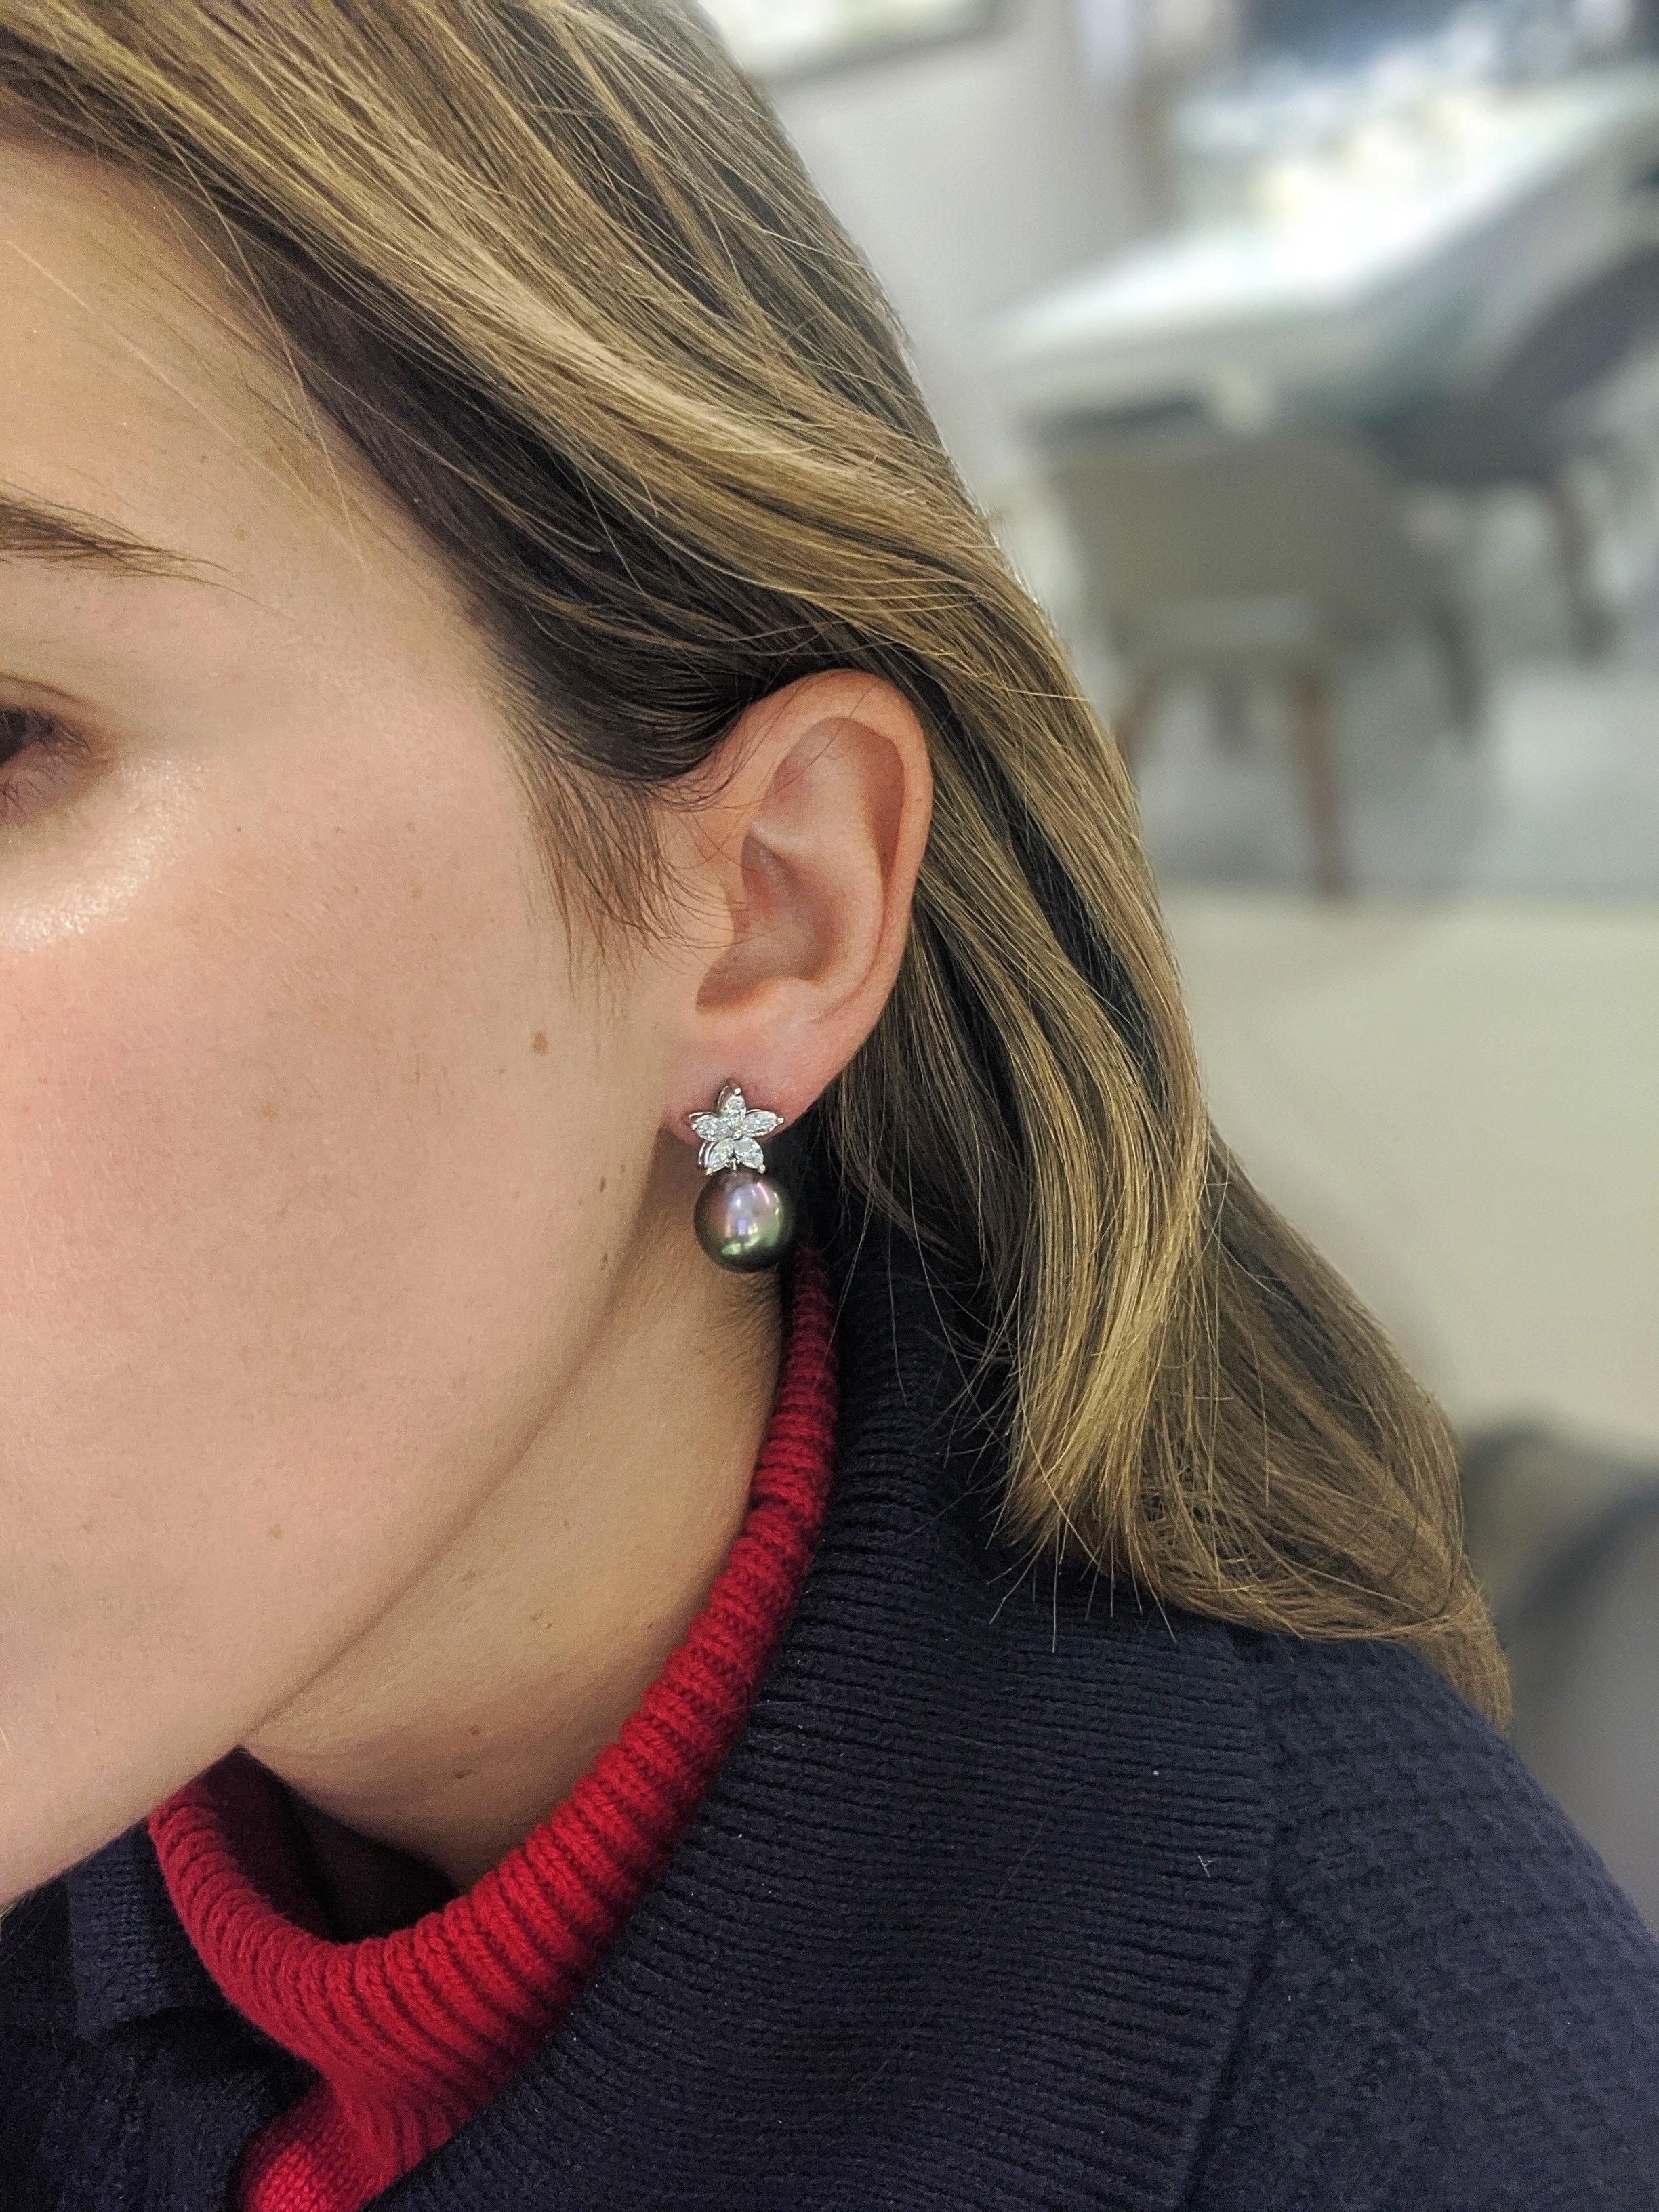 Cellini Jewelers NYC exquisite pair of drop earrings featuring Black Tahitian pearls 14 x 12.3 mm. The peacock colored pearls drop from a diamond flower made up of five marquis diamonds in each ear. The platinum earrings have a post back with a